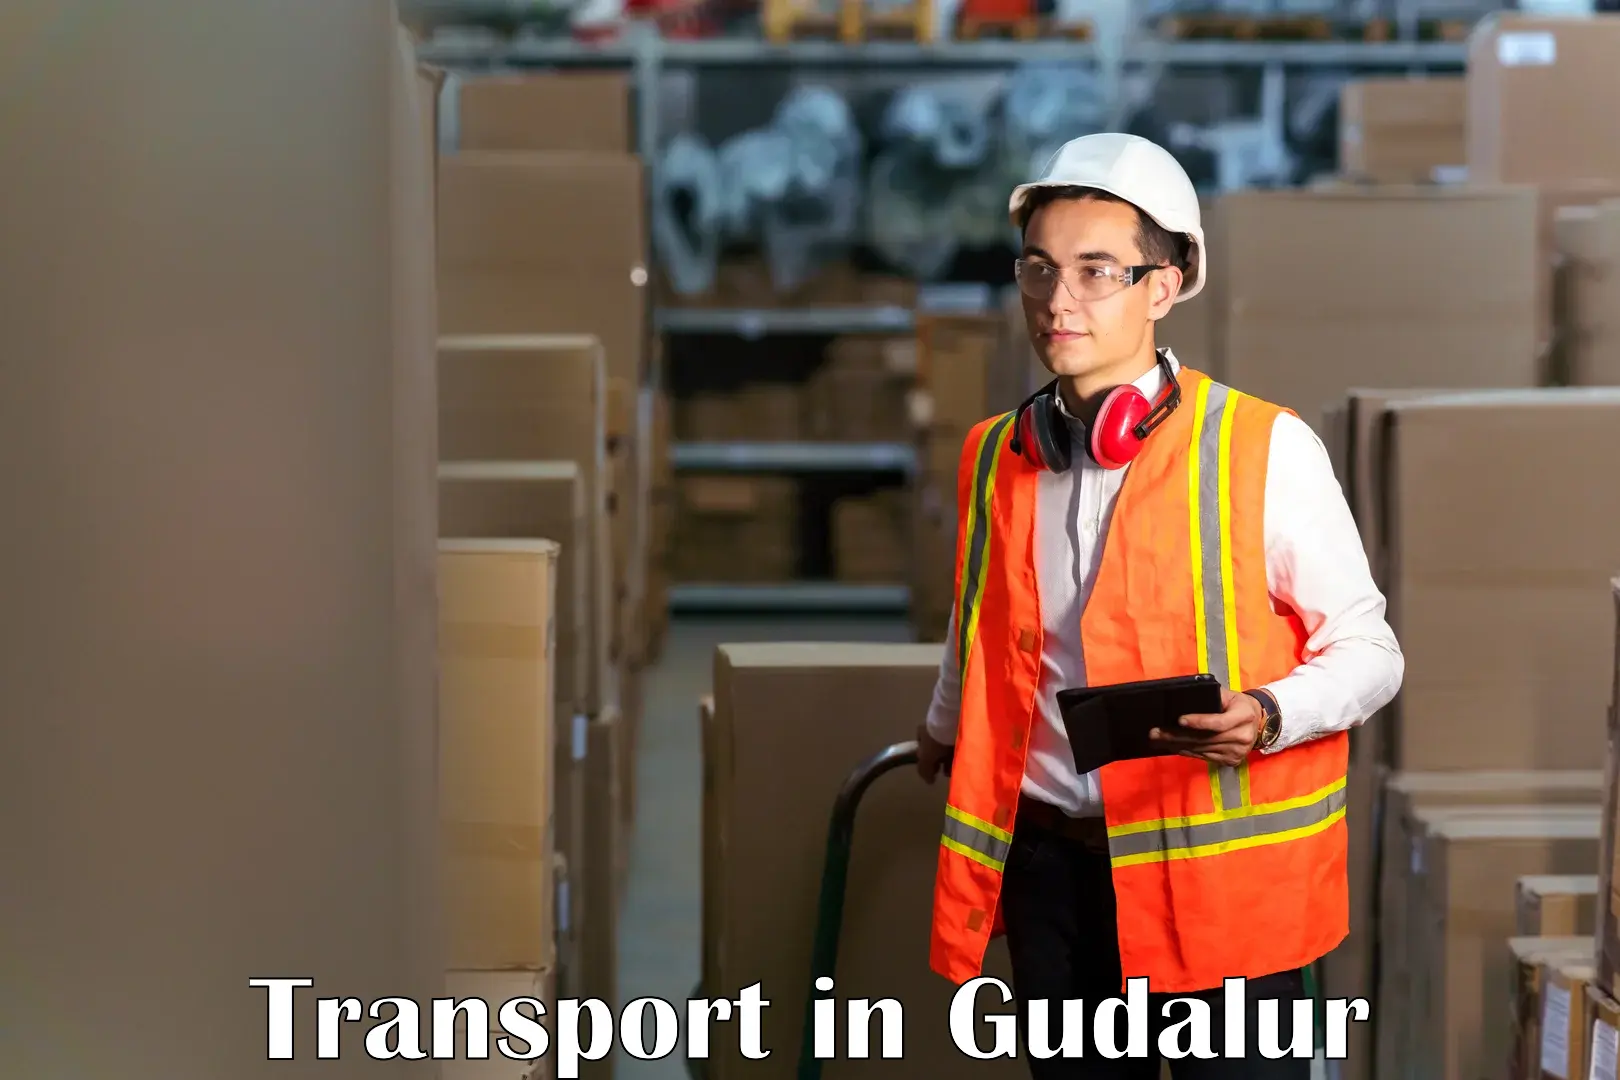 Road transport services in Gudalur